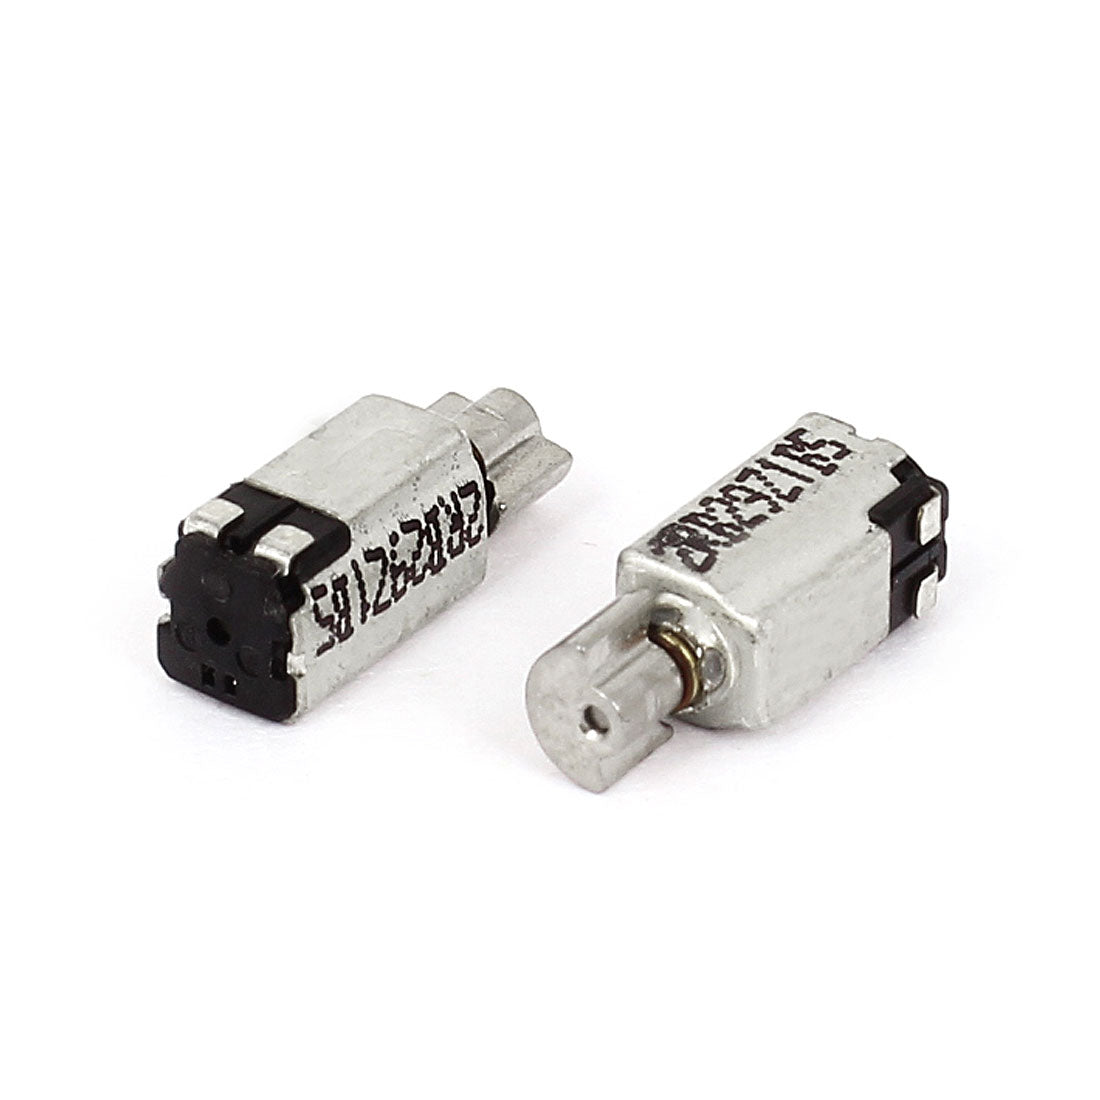 uxcell Uxcell DC1.5-3V Micro Coreless Vibration Motor 2pcs for Cell Phone Model Toy